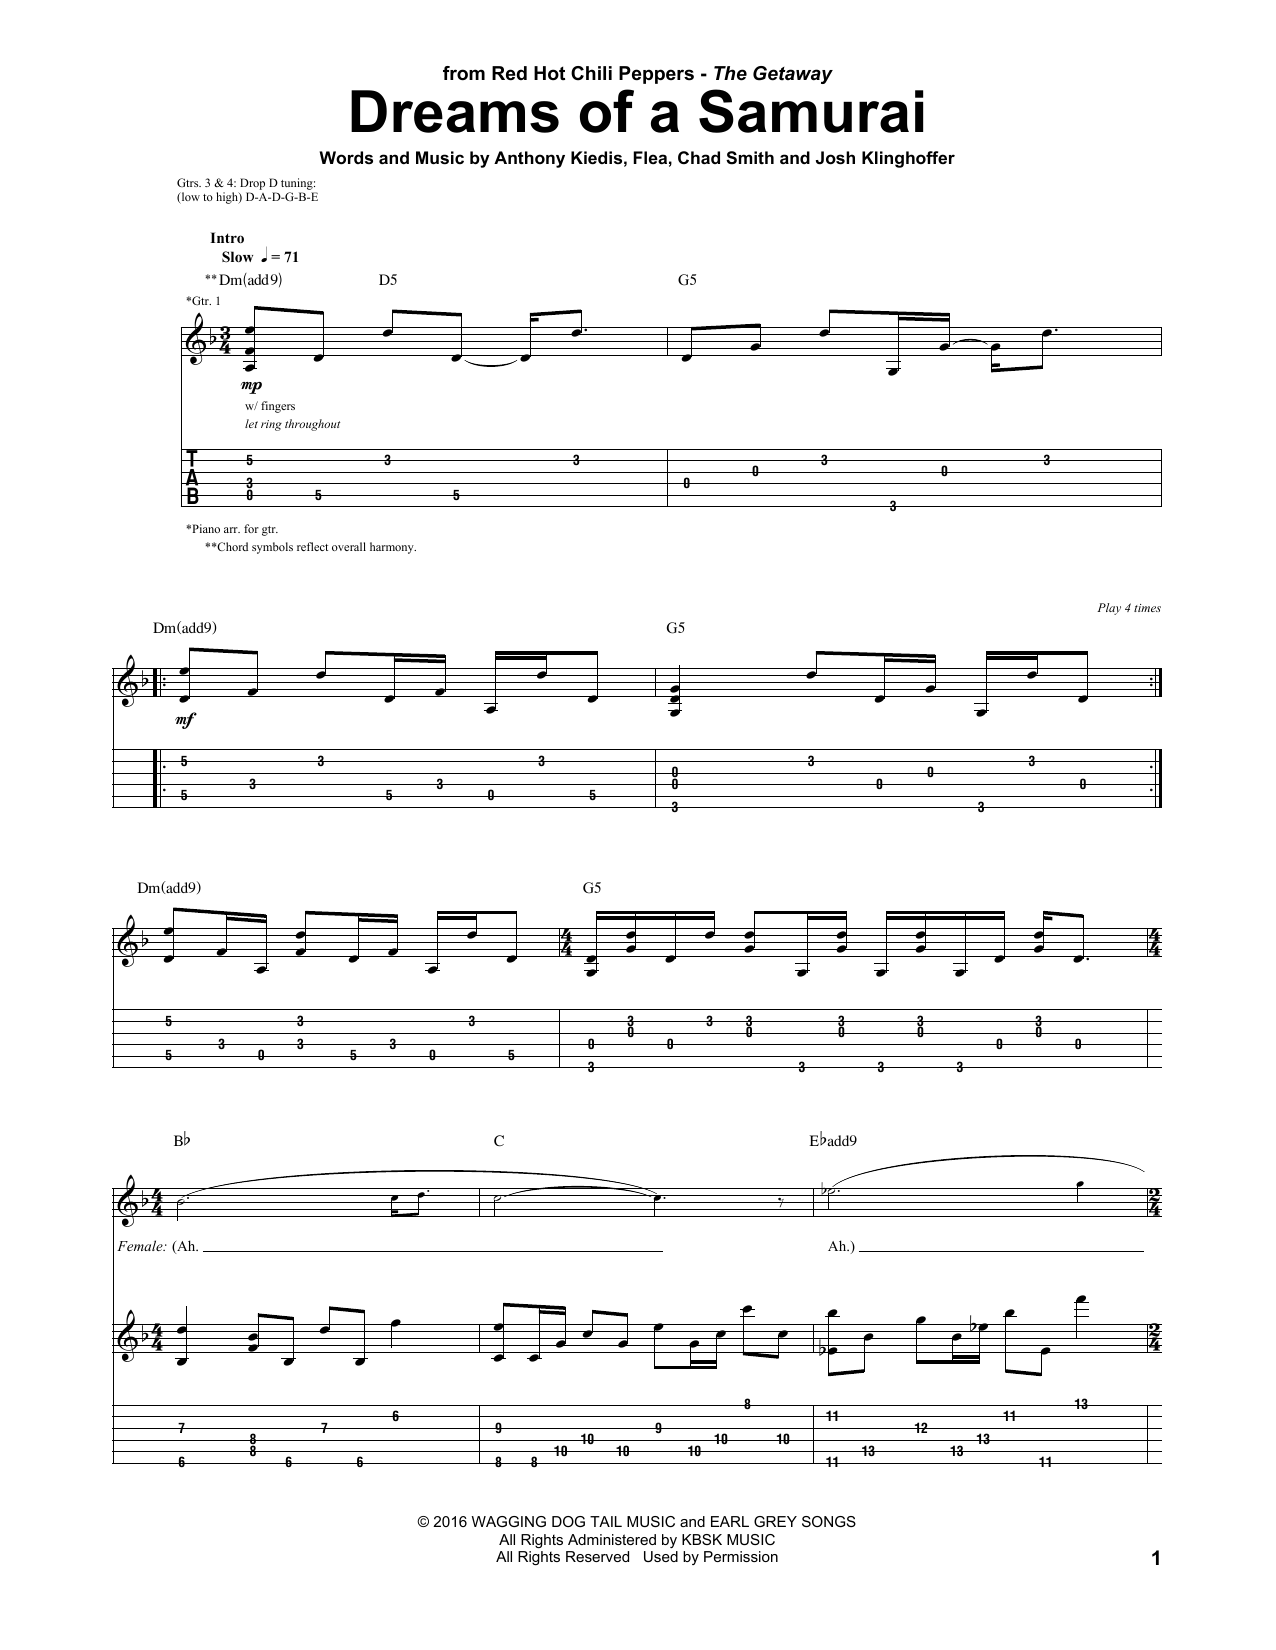 Download Red Hot Chili Peppers Dreams Of A Samurai Sheet Music